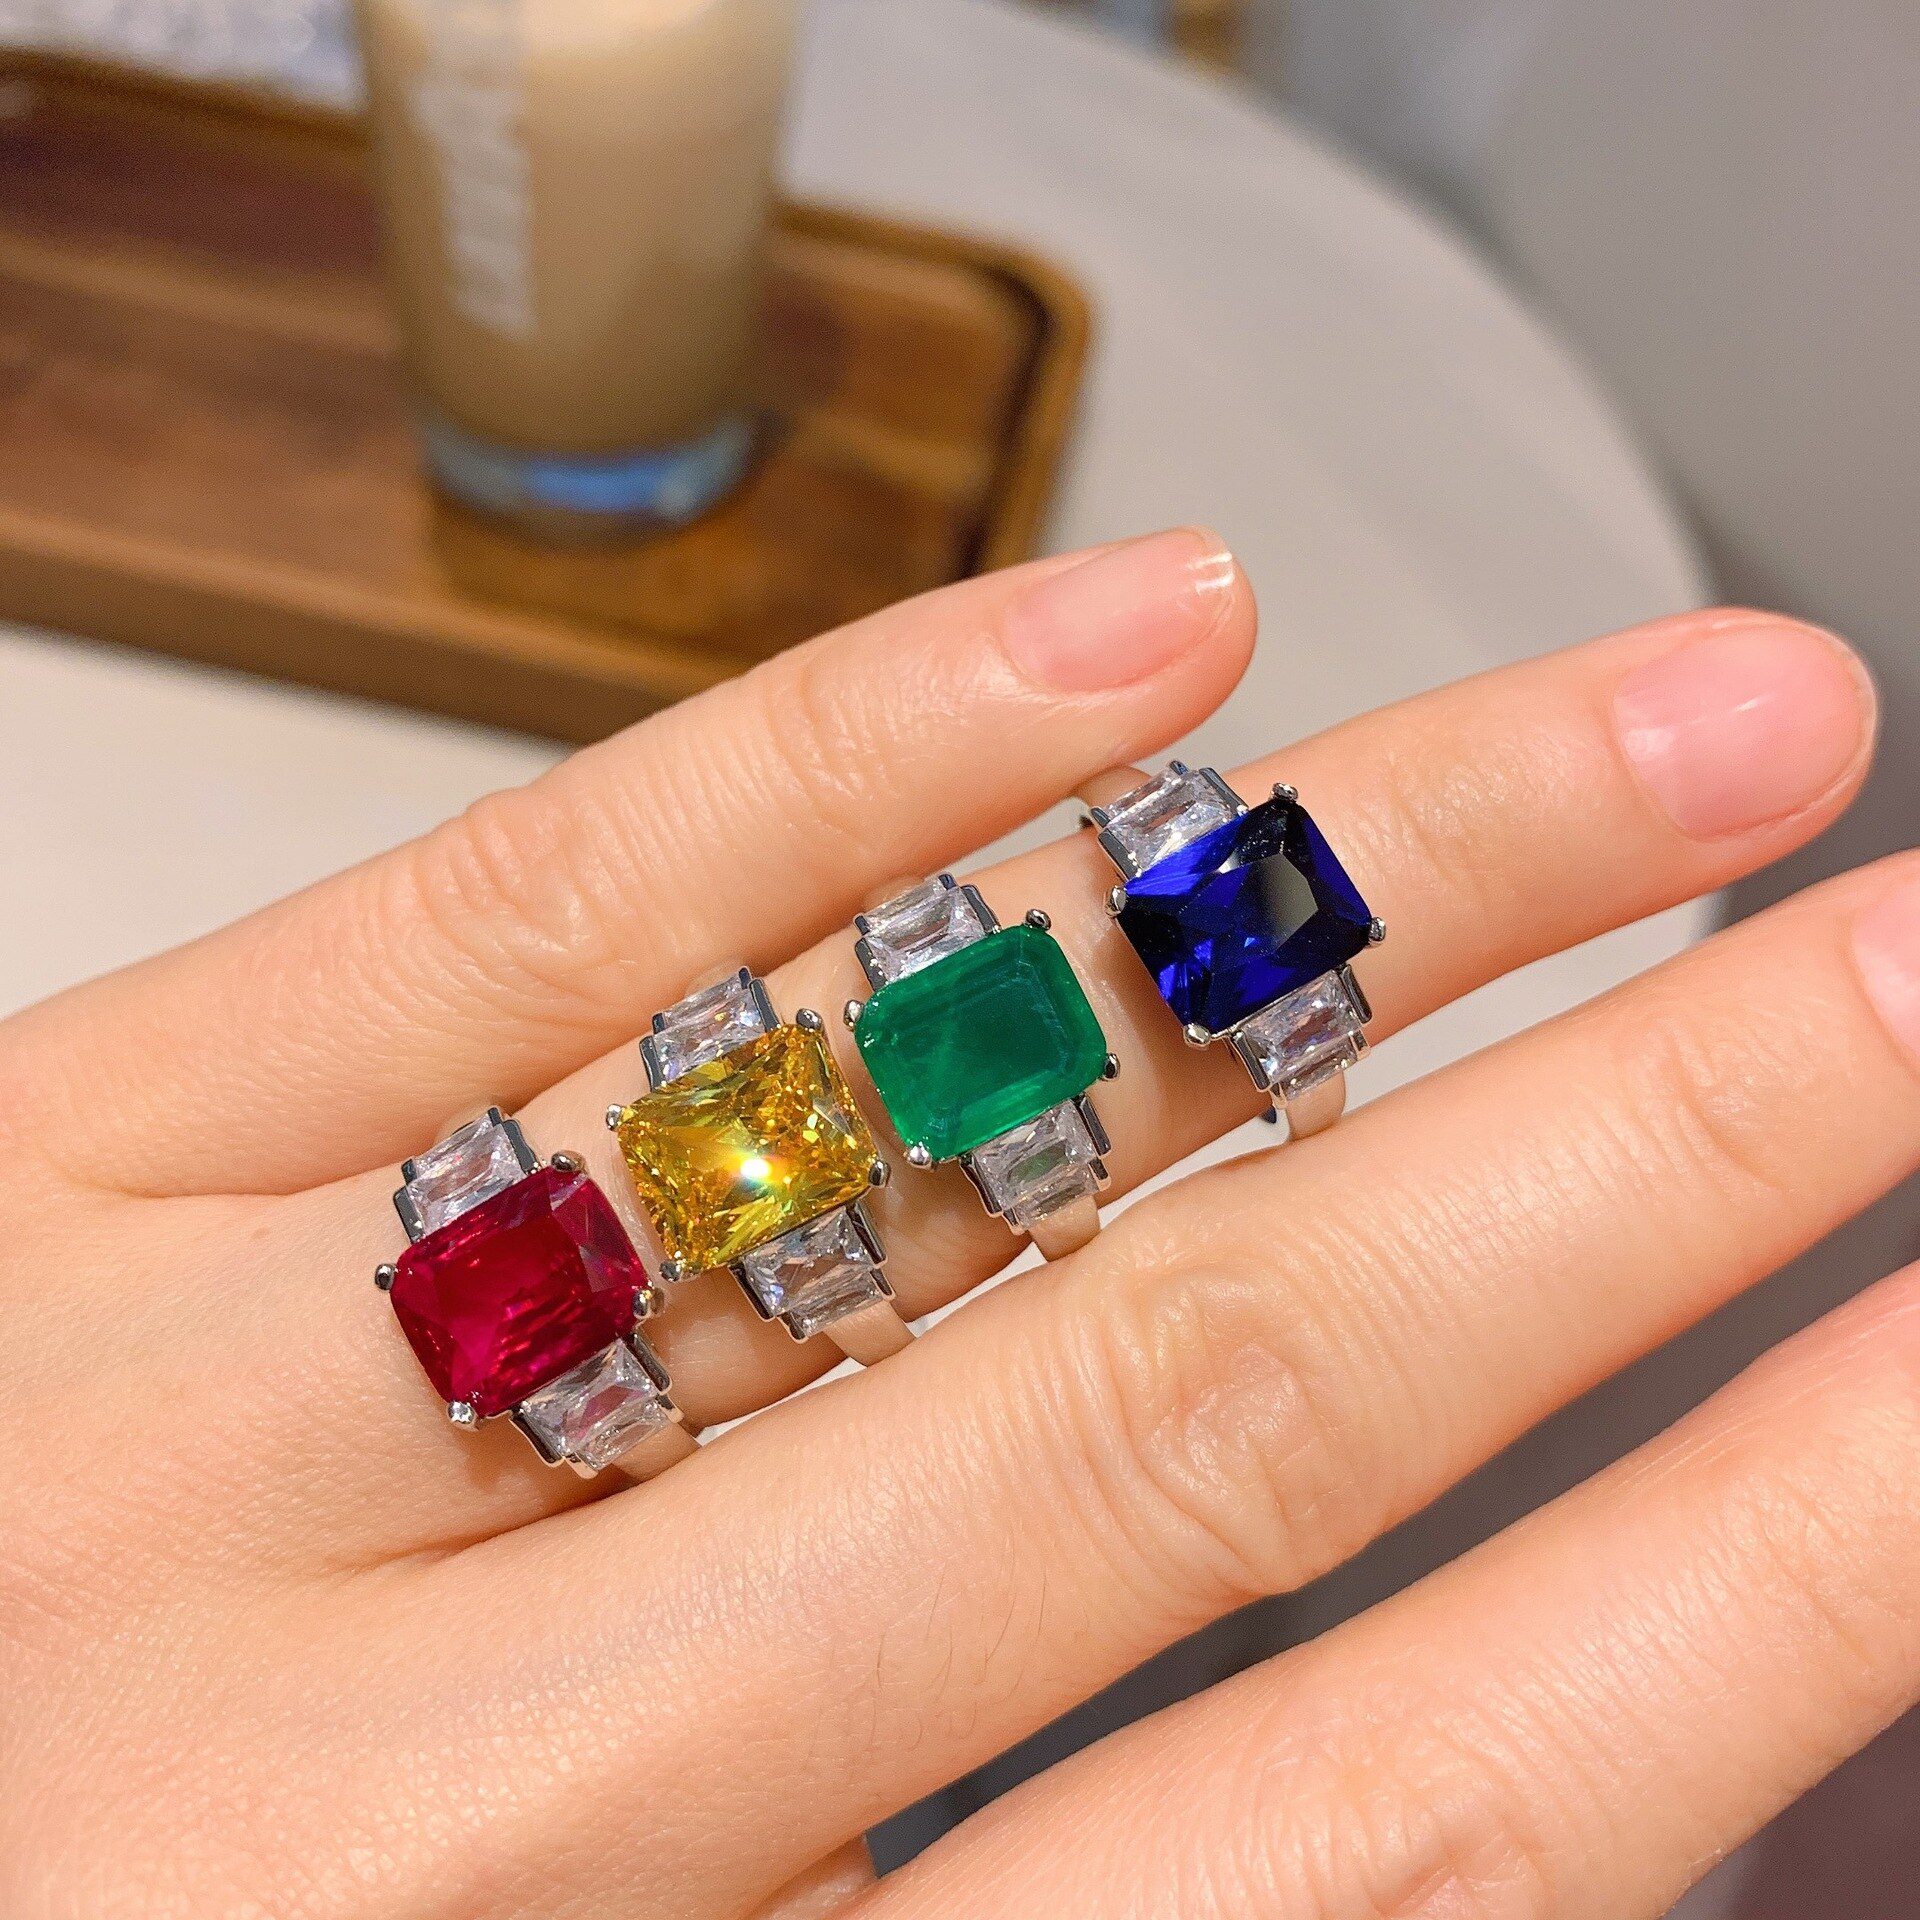 Charms-Square-Ruby-Sapphire-High-Carbon-Diamond-Couple-Rings-2022-Trend-Women-s-Jewelry-Give-Girlfriend.jpg